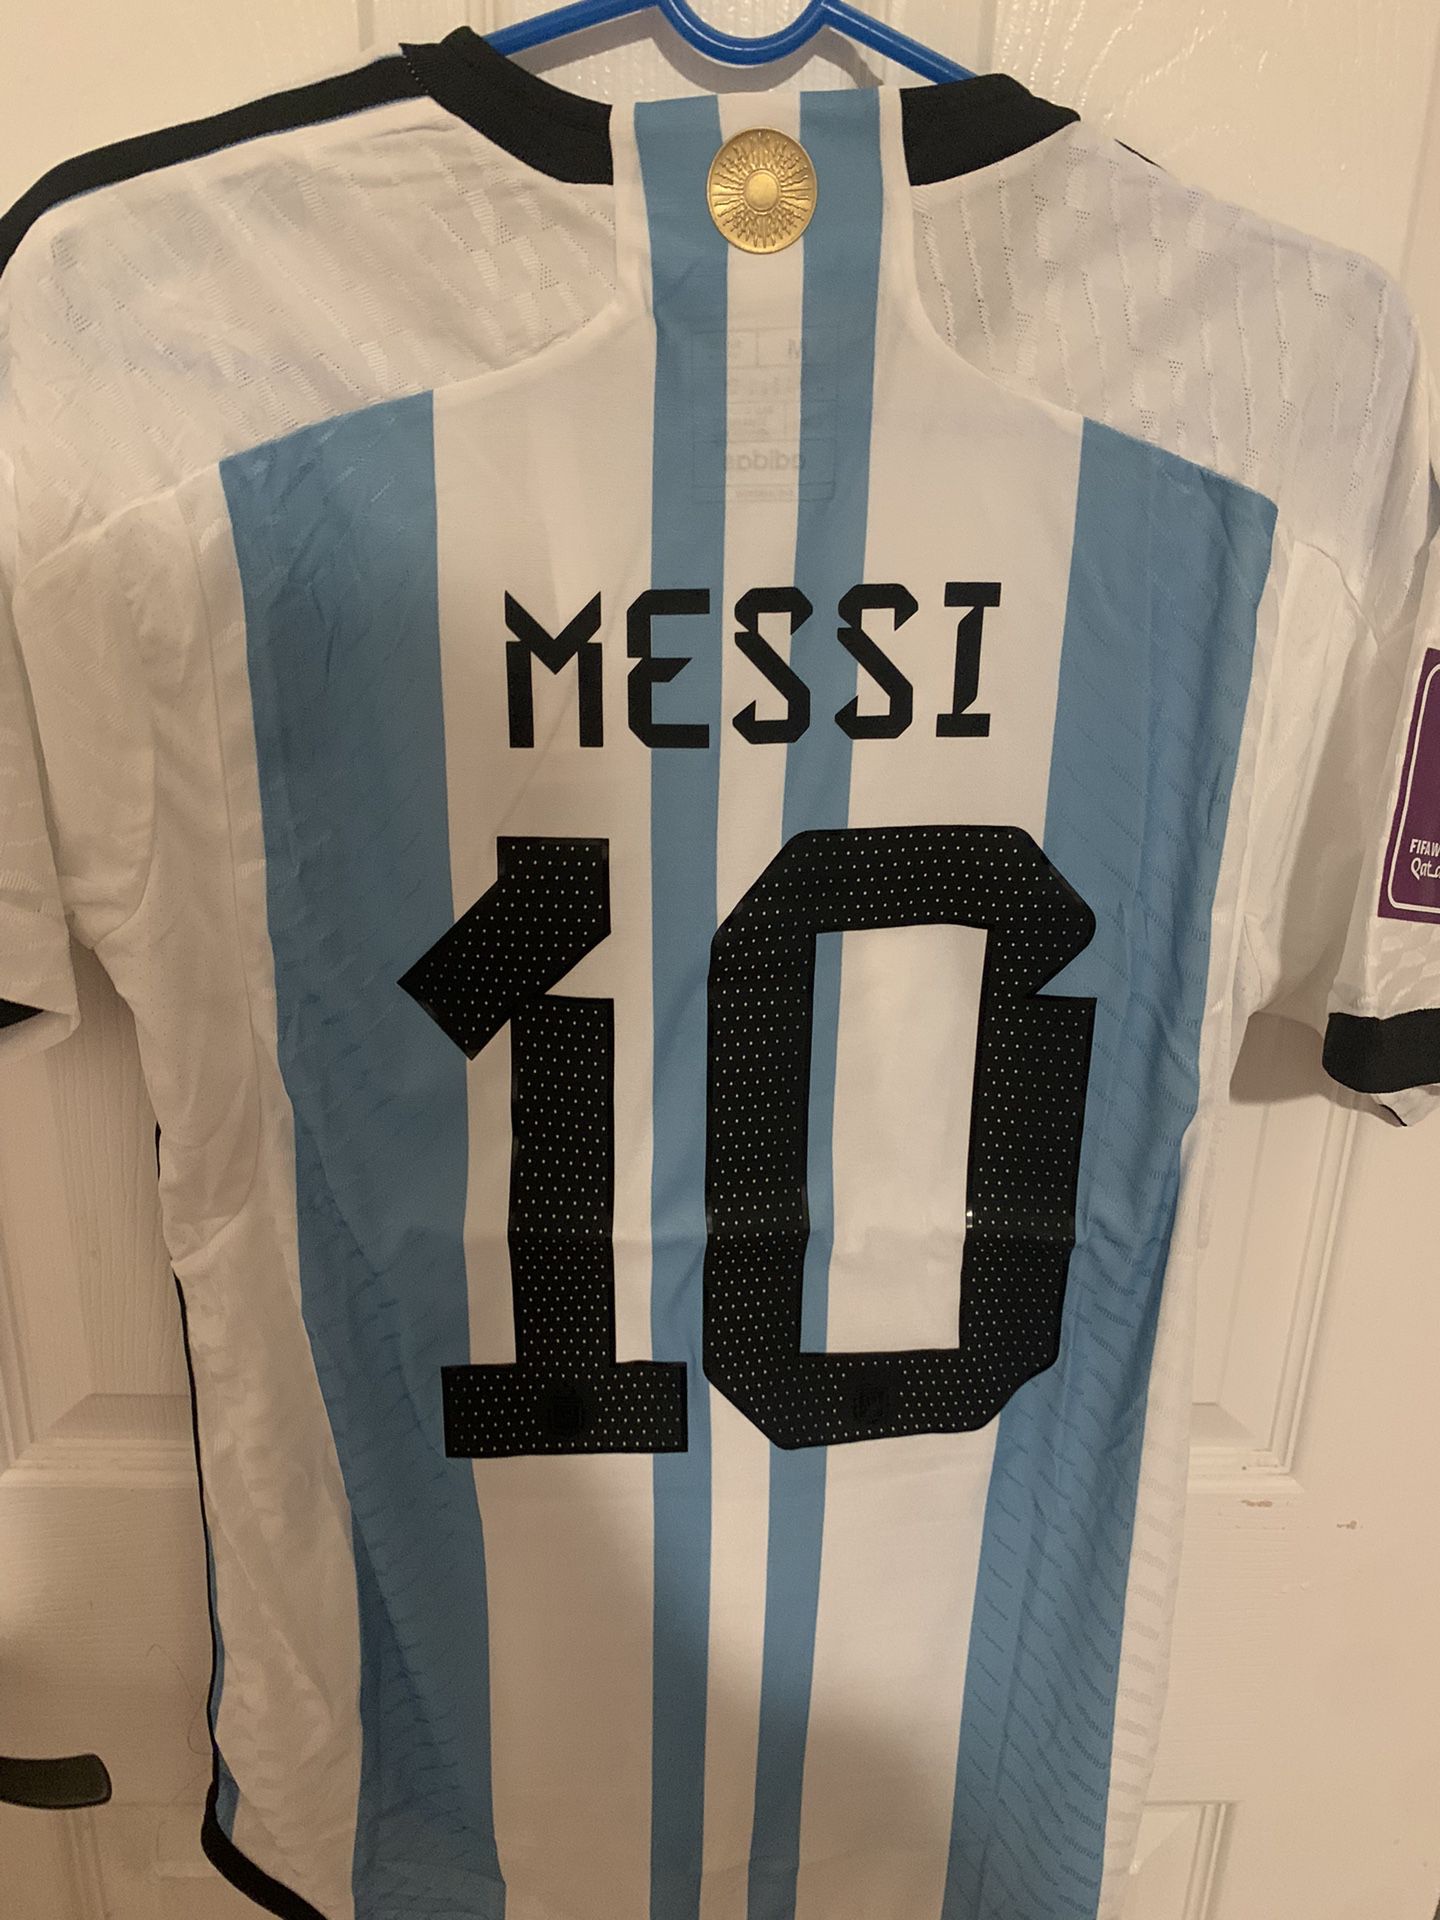 Argentina 3 Star World Cup Messi Jersey for Sale in South